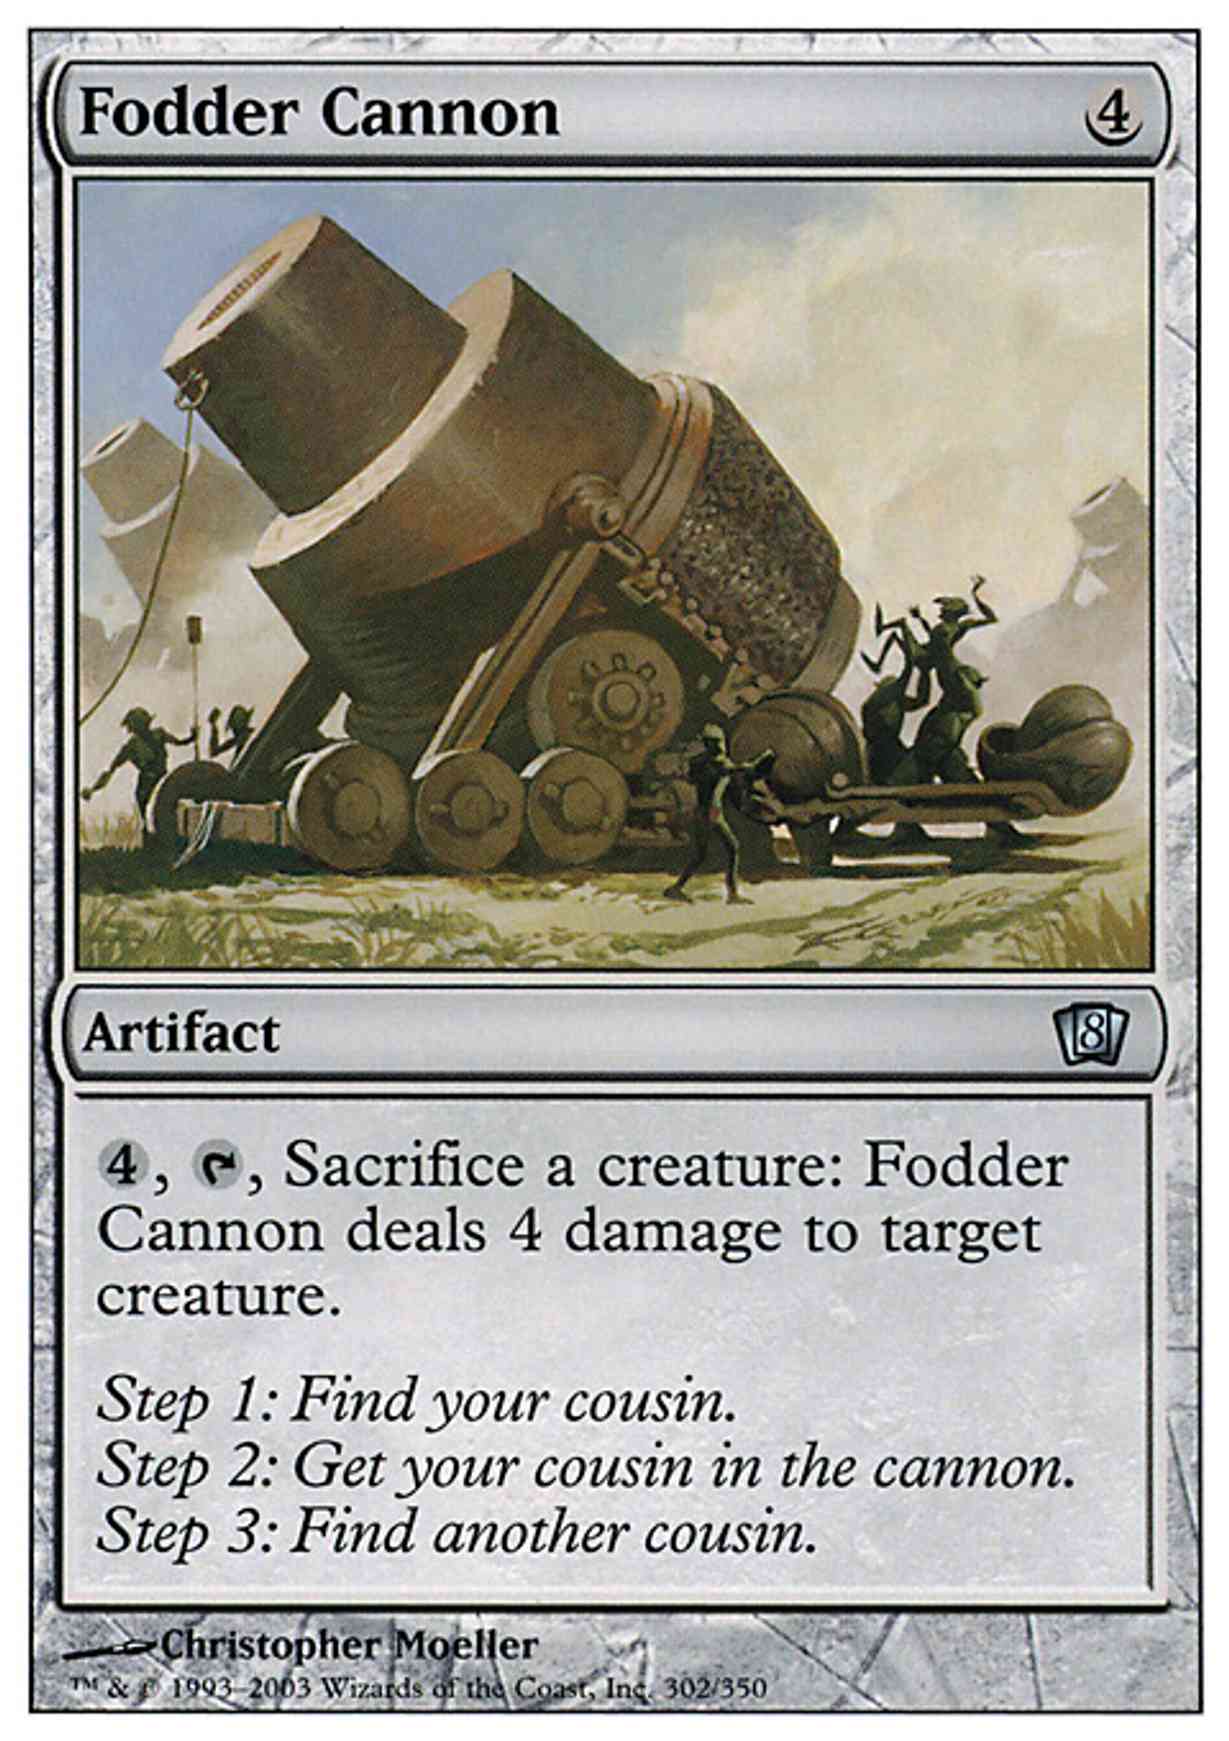 Fodder Cannon magic card front